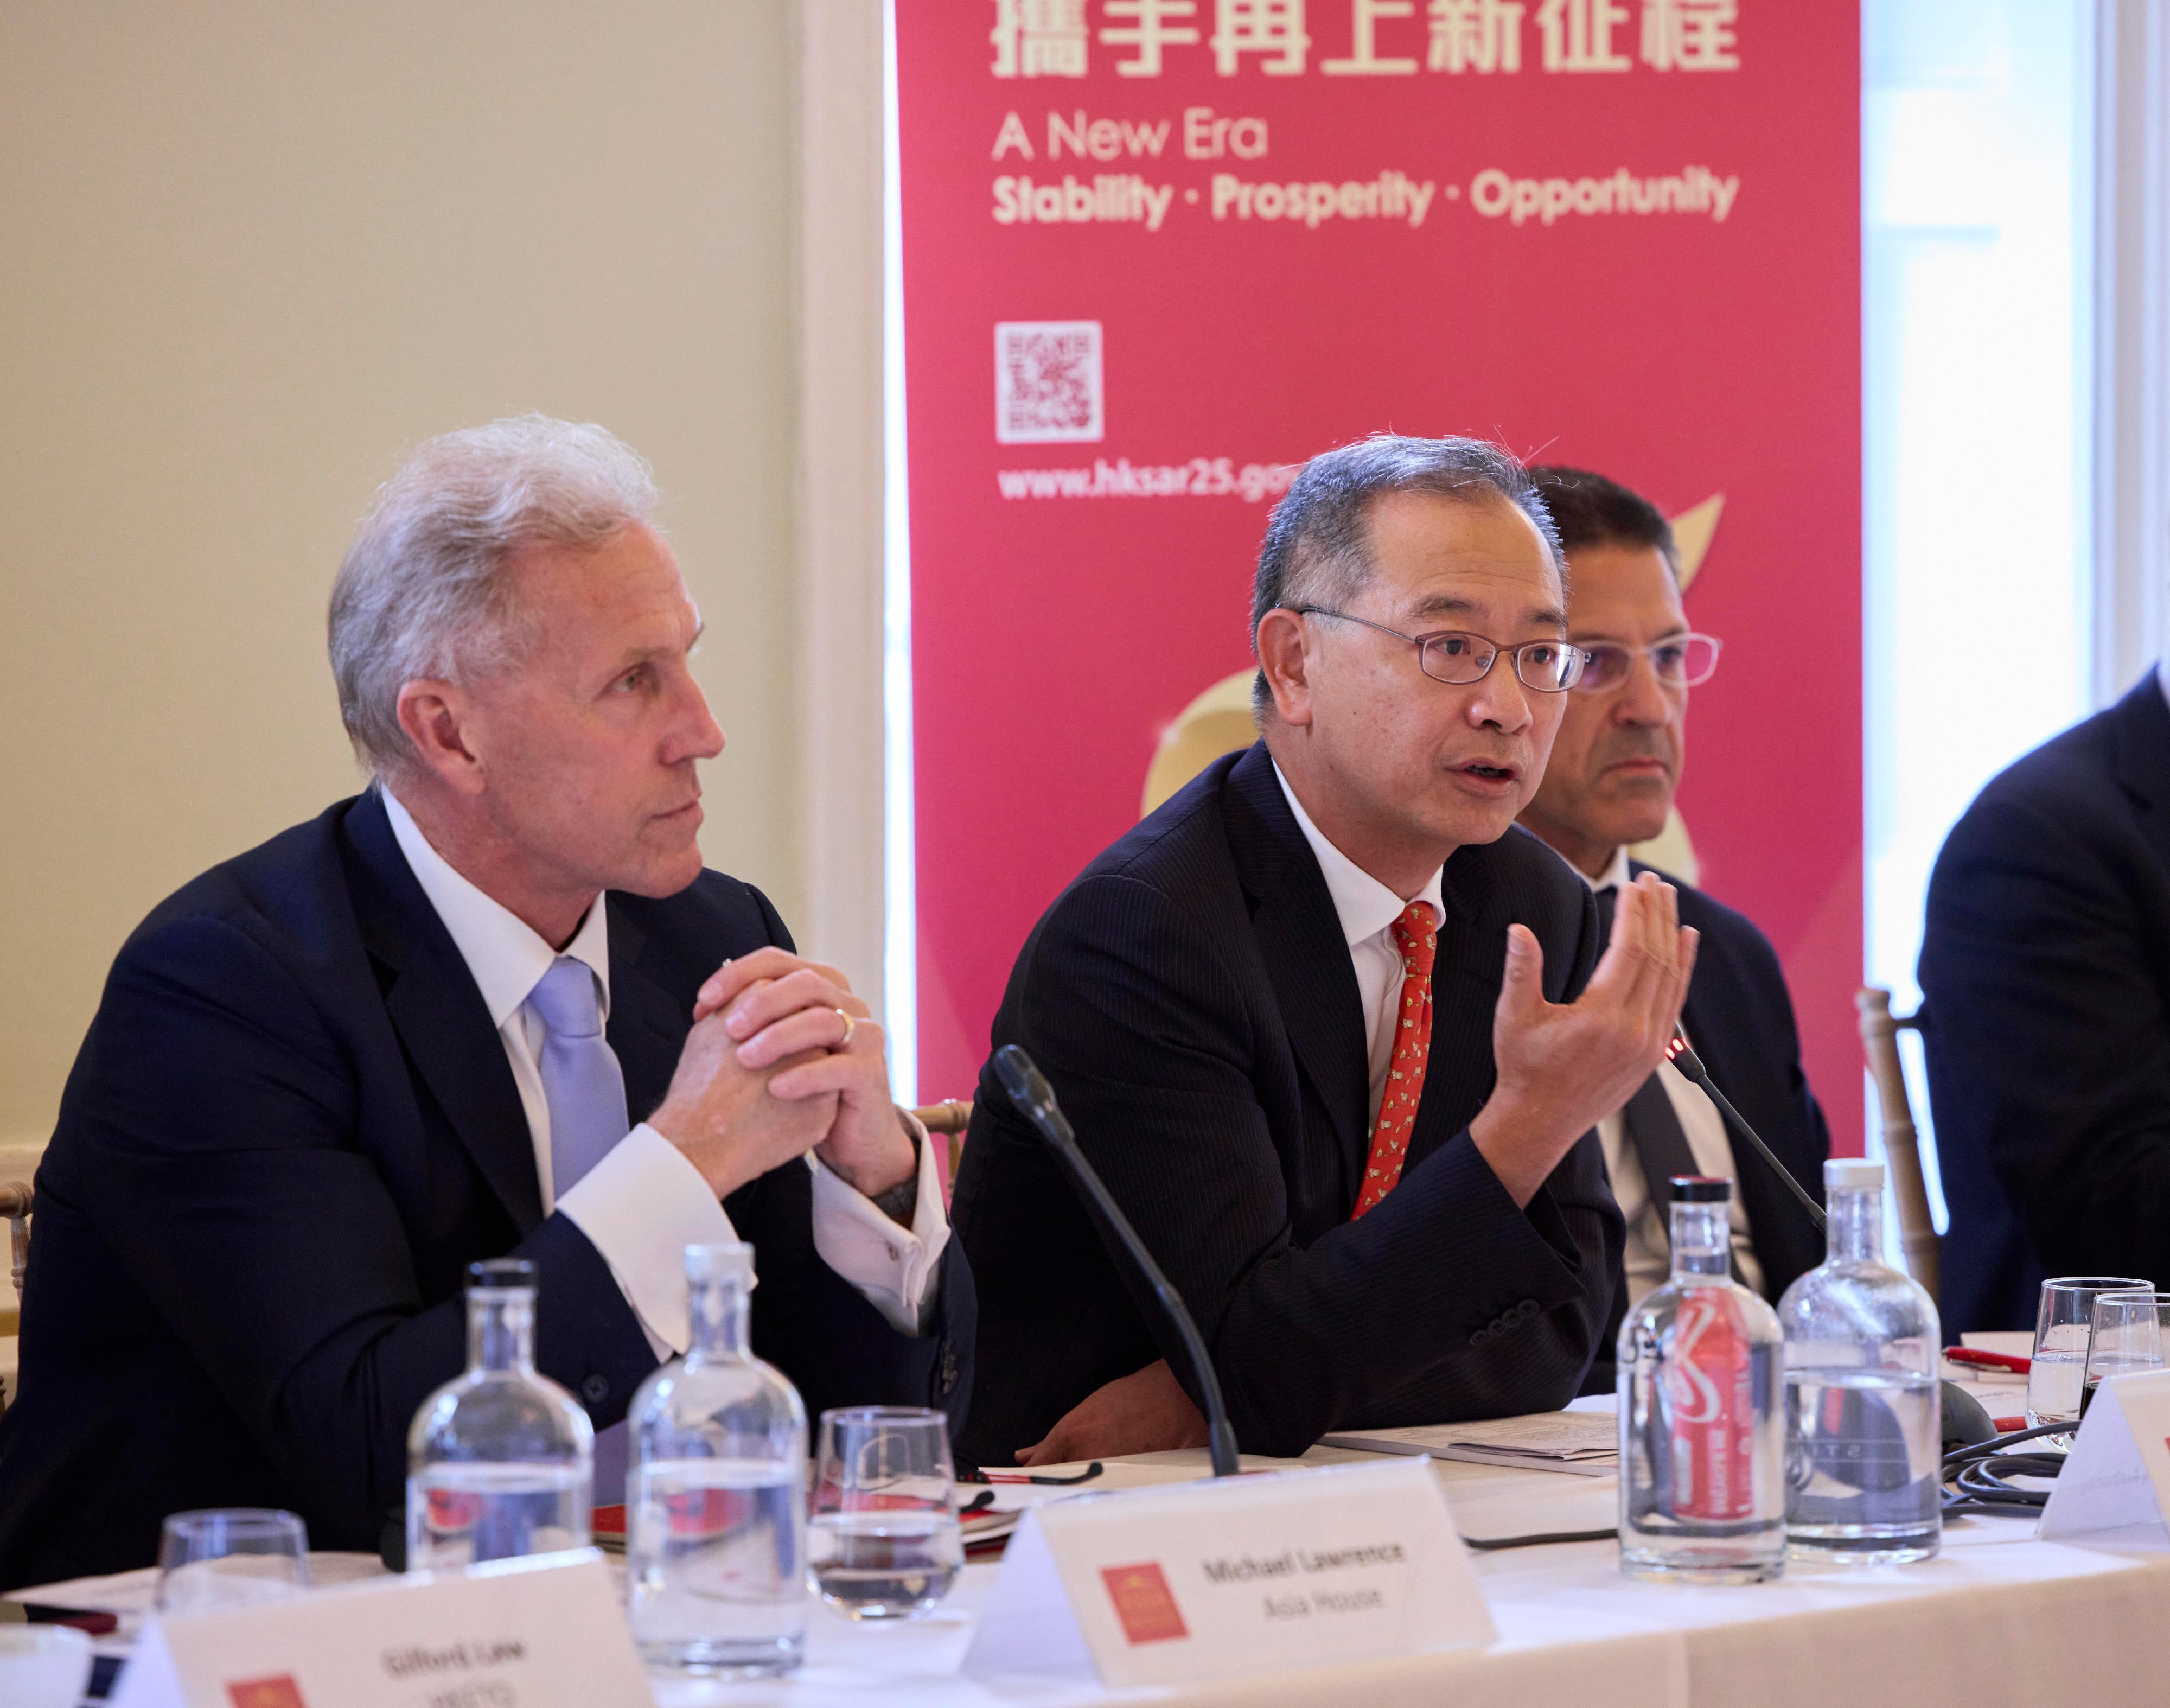 The Hong Kong Economic and Trade Office, London, partnered with the Asia House on May 12 (London time) to hold a seminar for leaders in UK’s financial services sector.  The Chief Executive of the Hong Kong Monetary Authority, Mr Eddie Yue (centre), gave a keynote speech. Looking on is the Chief Executive of the Asia House, Mr Michael Lawrence (left).